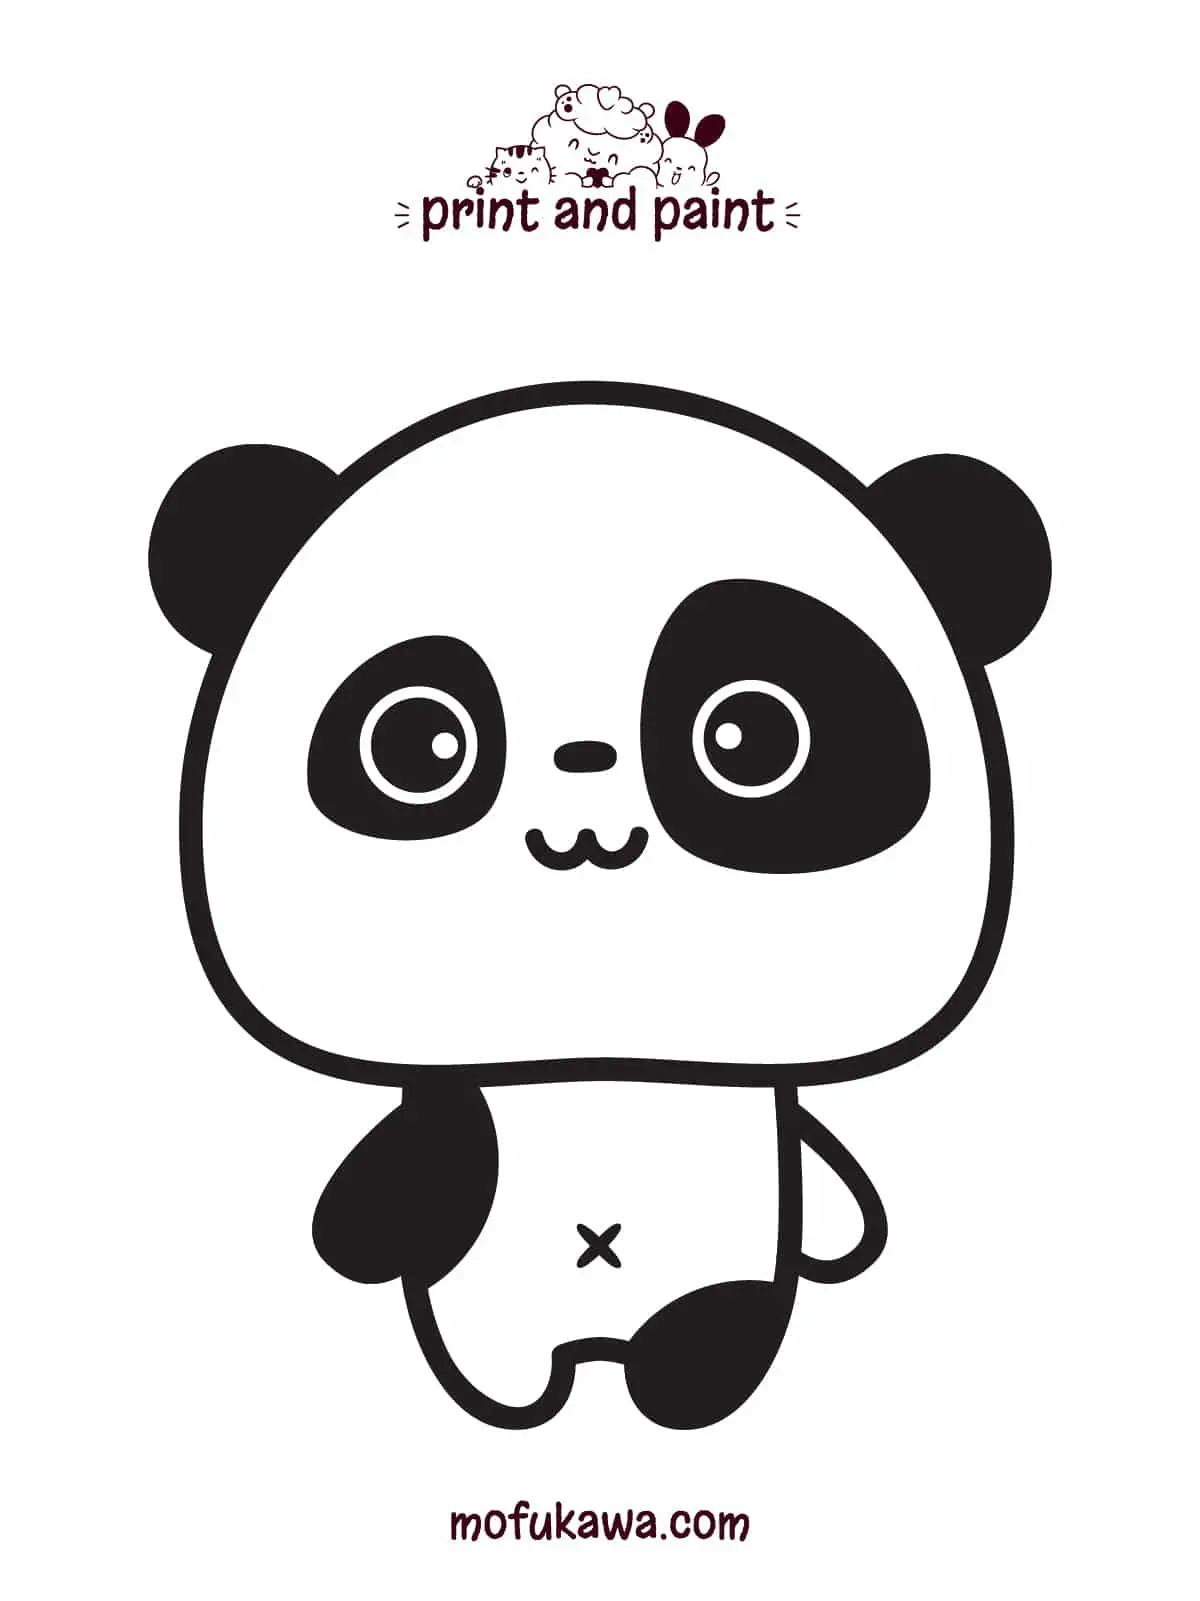 How To Draw A Cute Panda - Easy Step By Step Lesson For Beginners